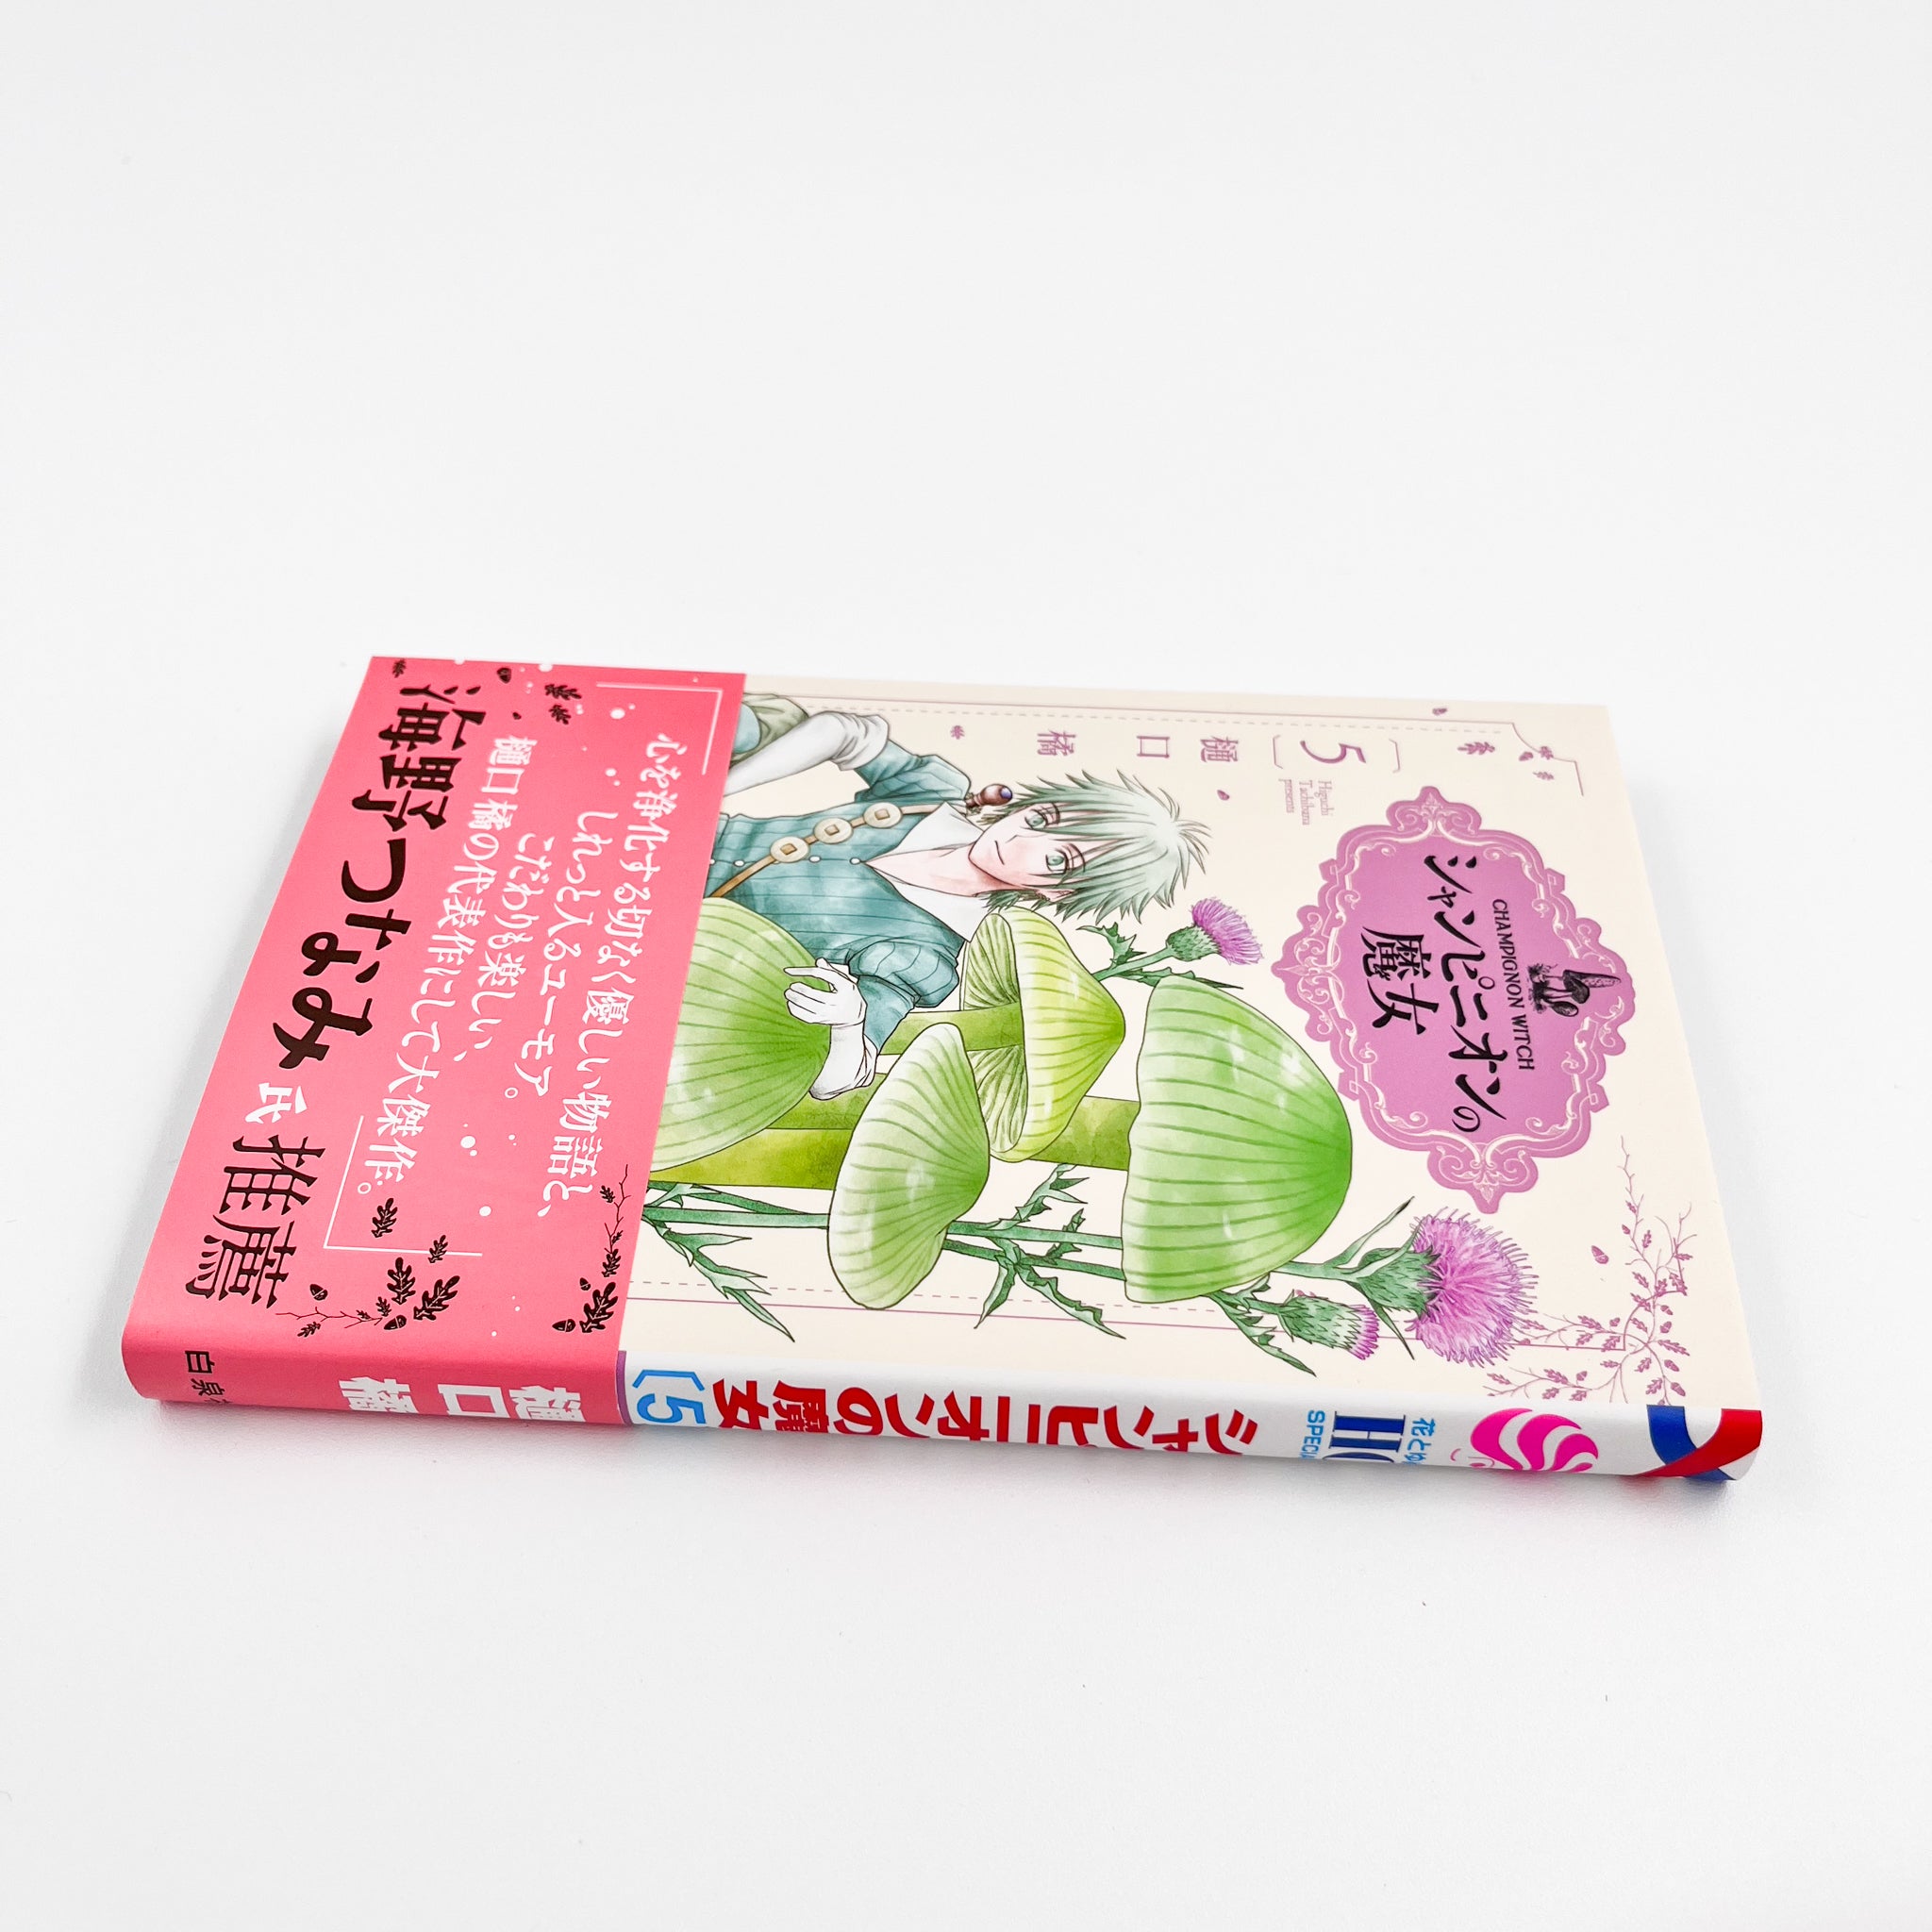 Champignon no Majo Volume 5 side view with spine and obi